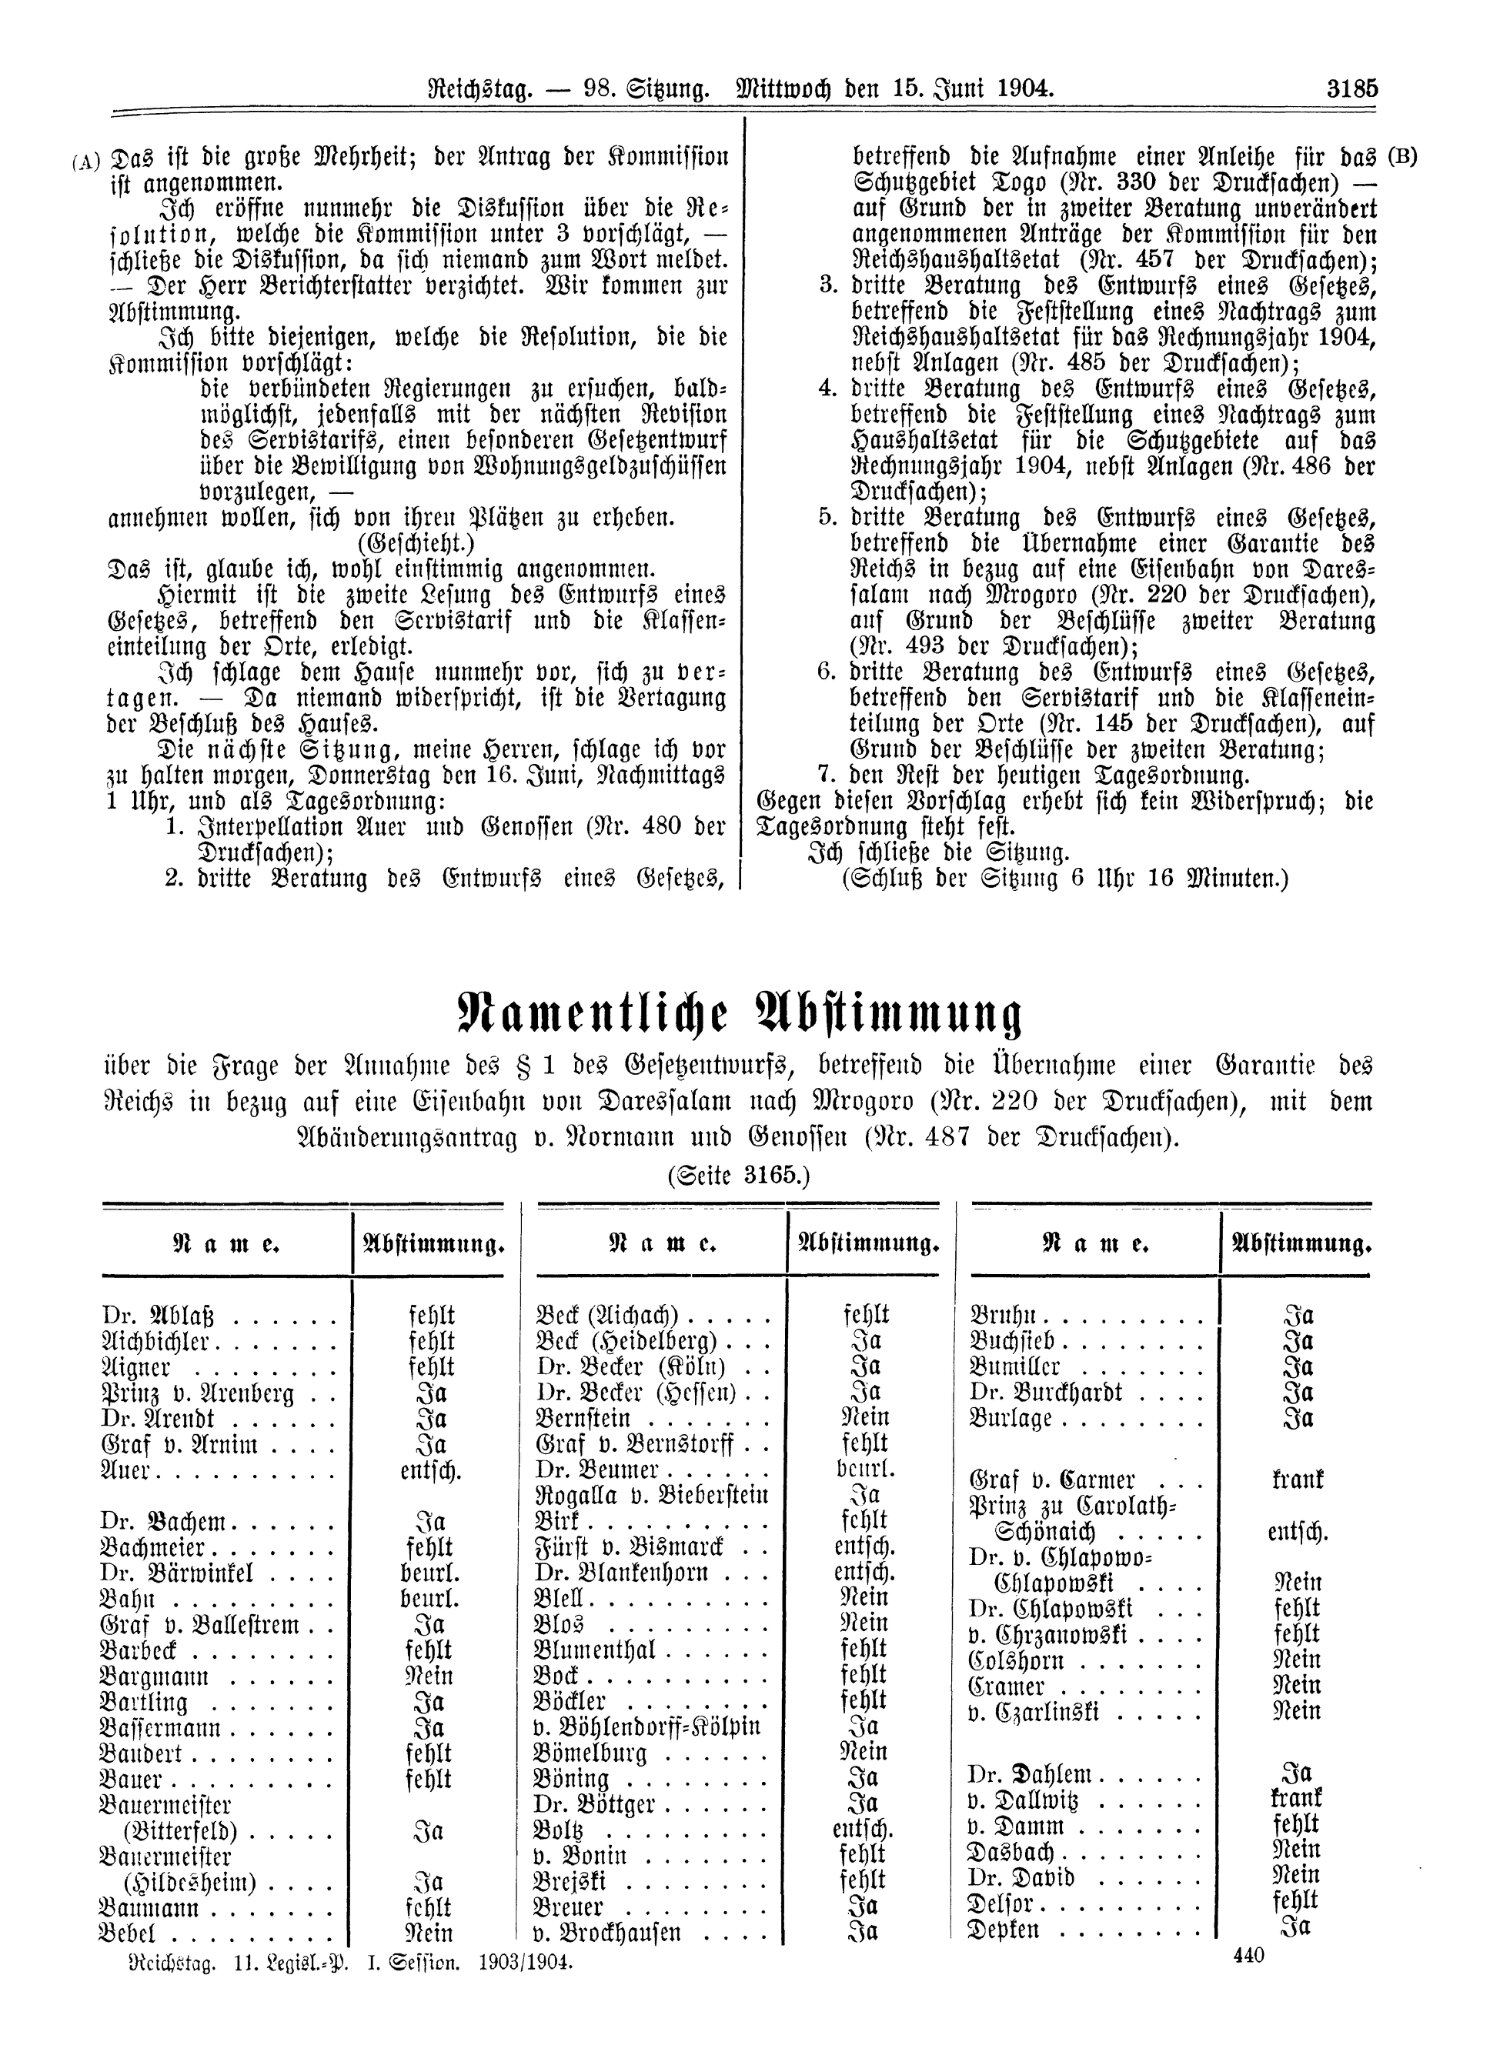 Scan of page 3185